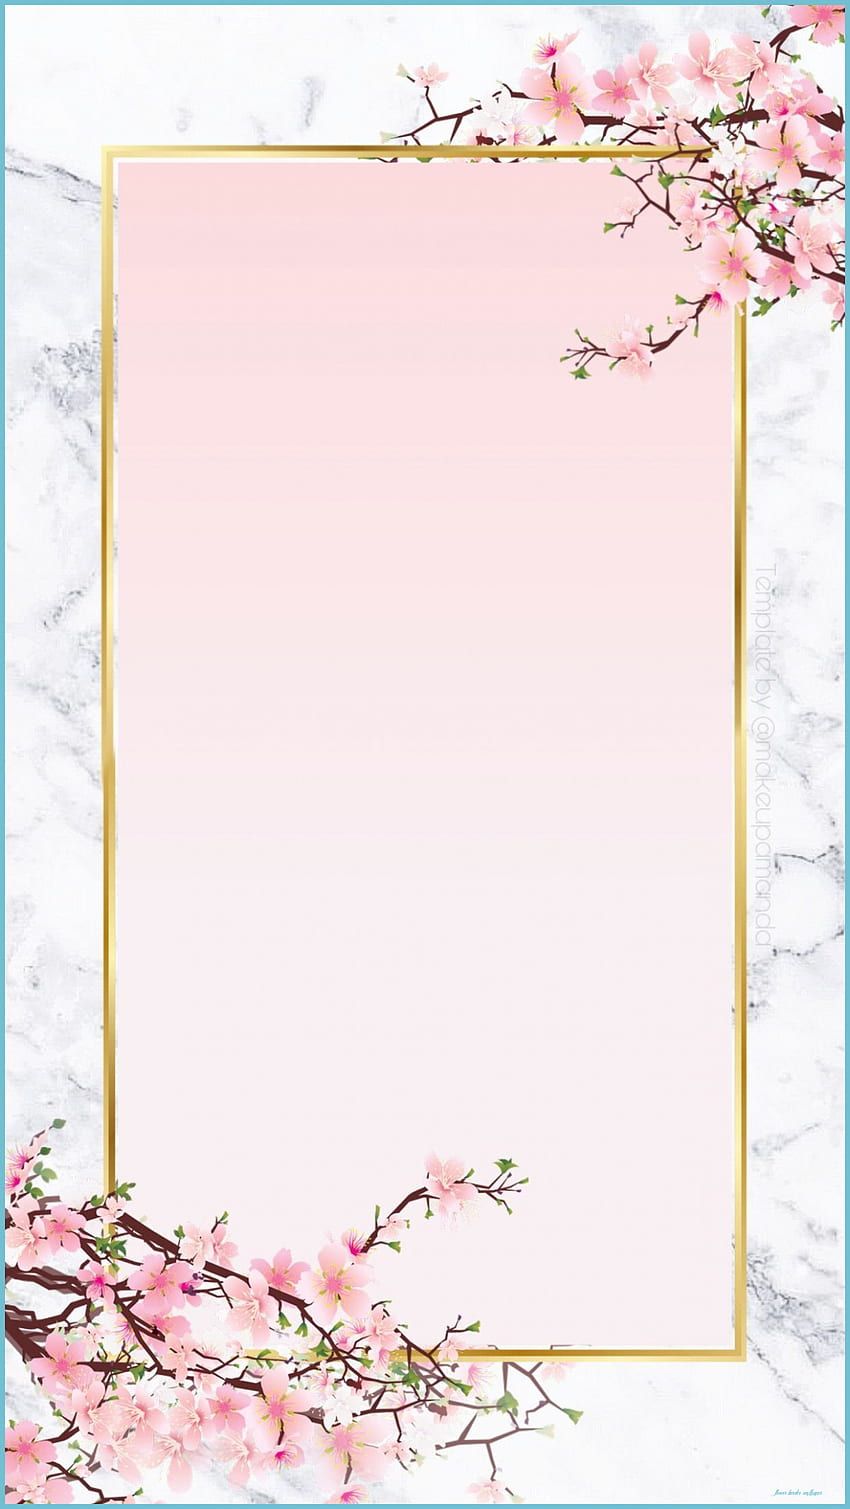 Pink and white marble background, gold frame, cherry blossom branch, how to make a birthday invitation - Border